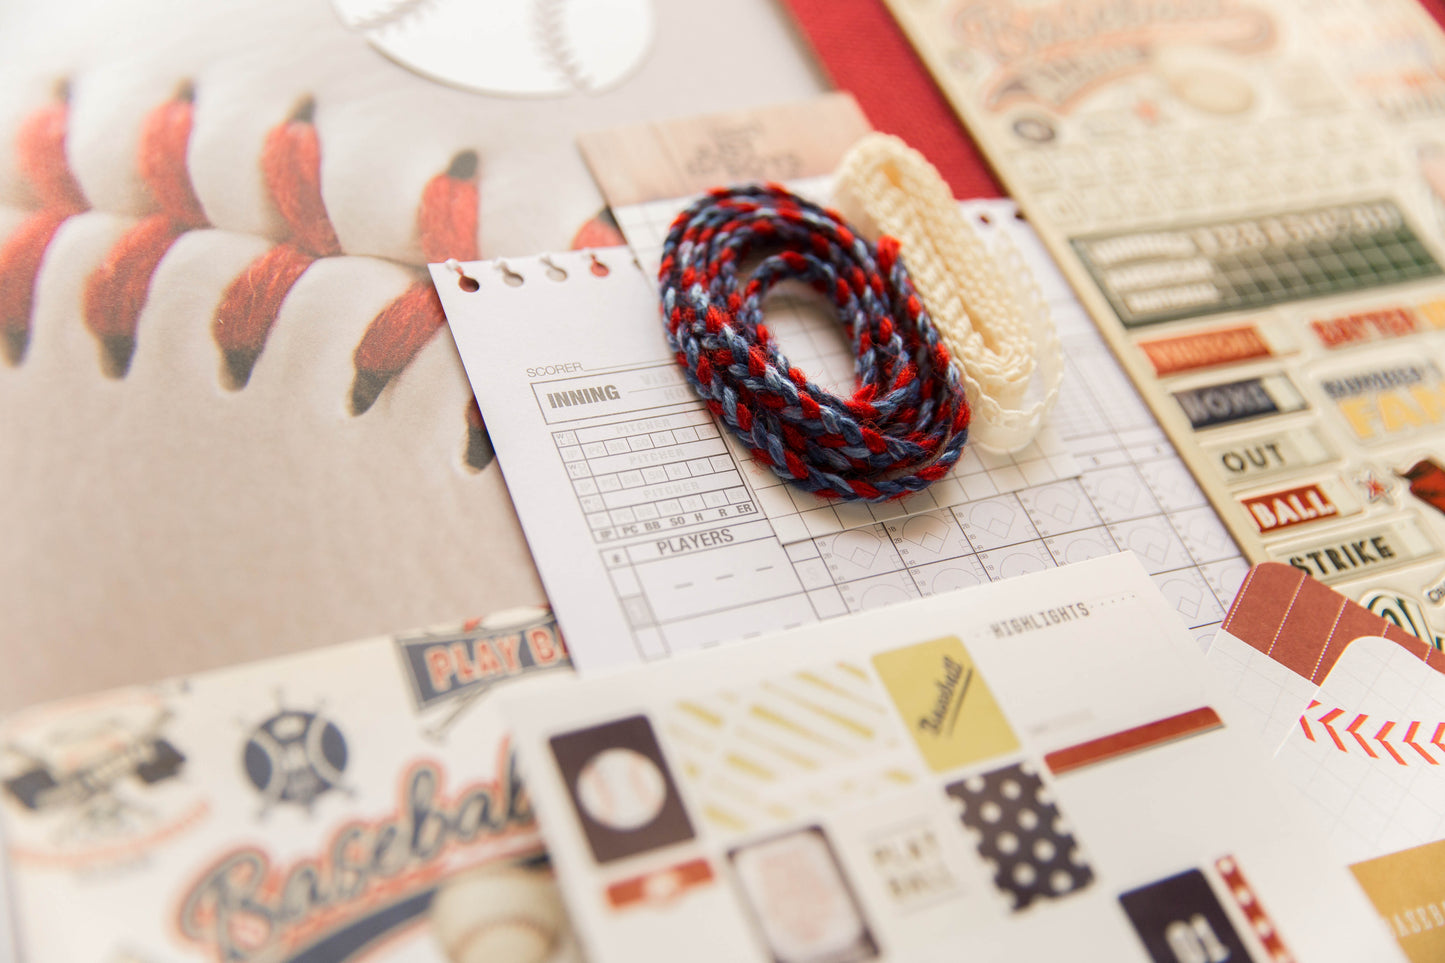 "Take Me Out to the Ball Game" Deluxe Theme Kit